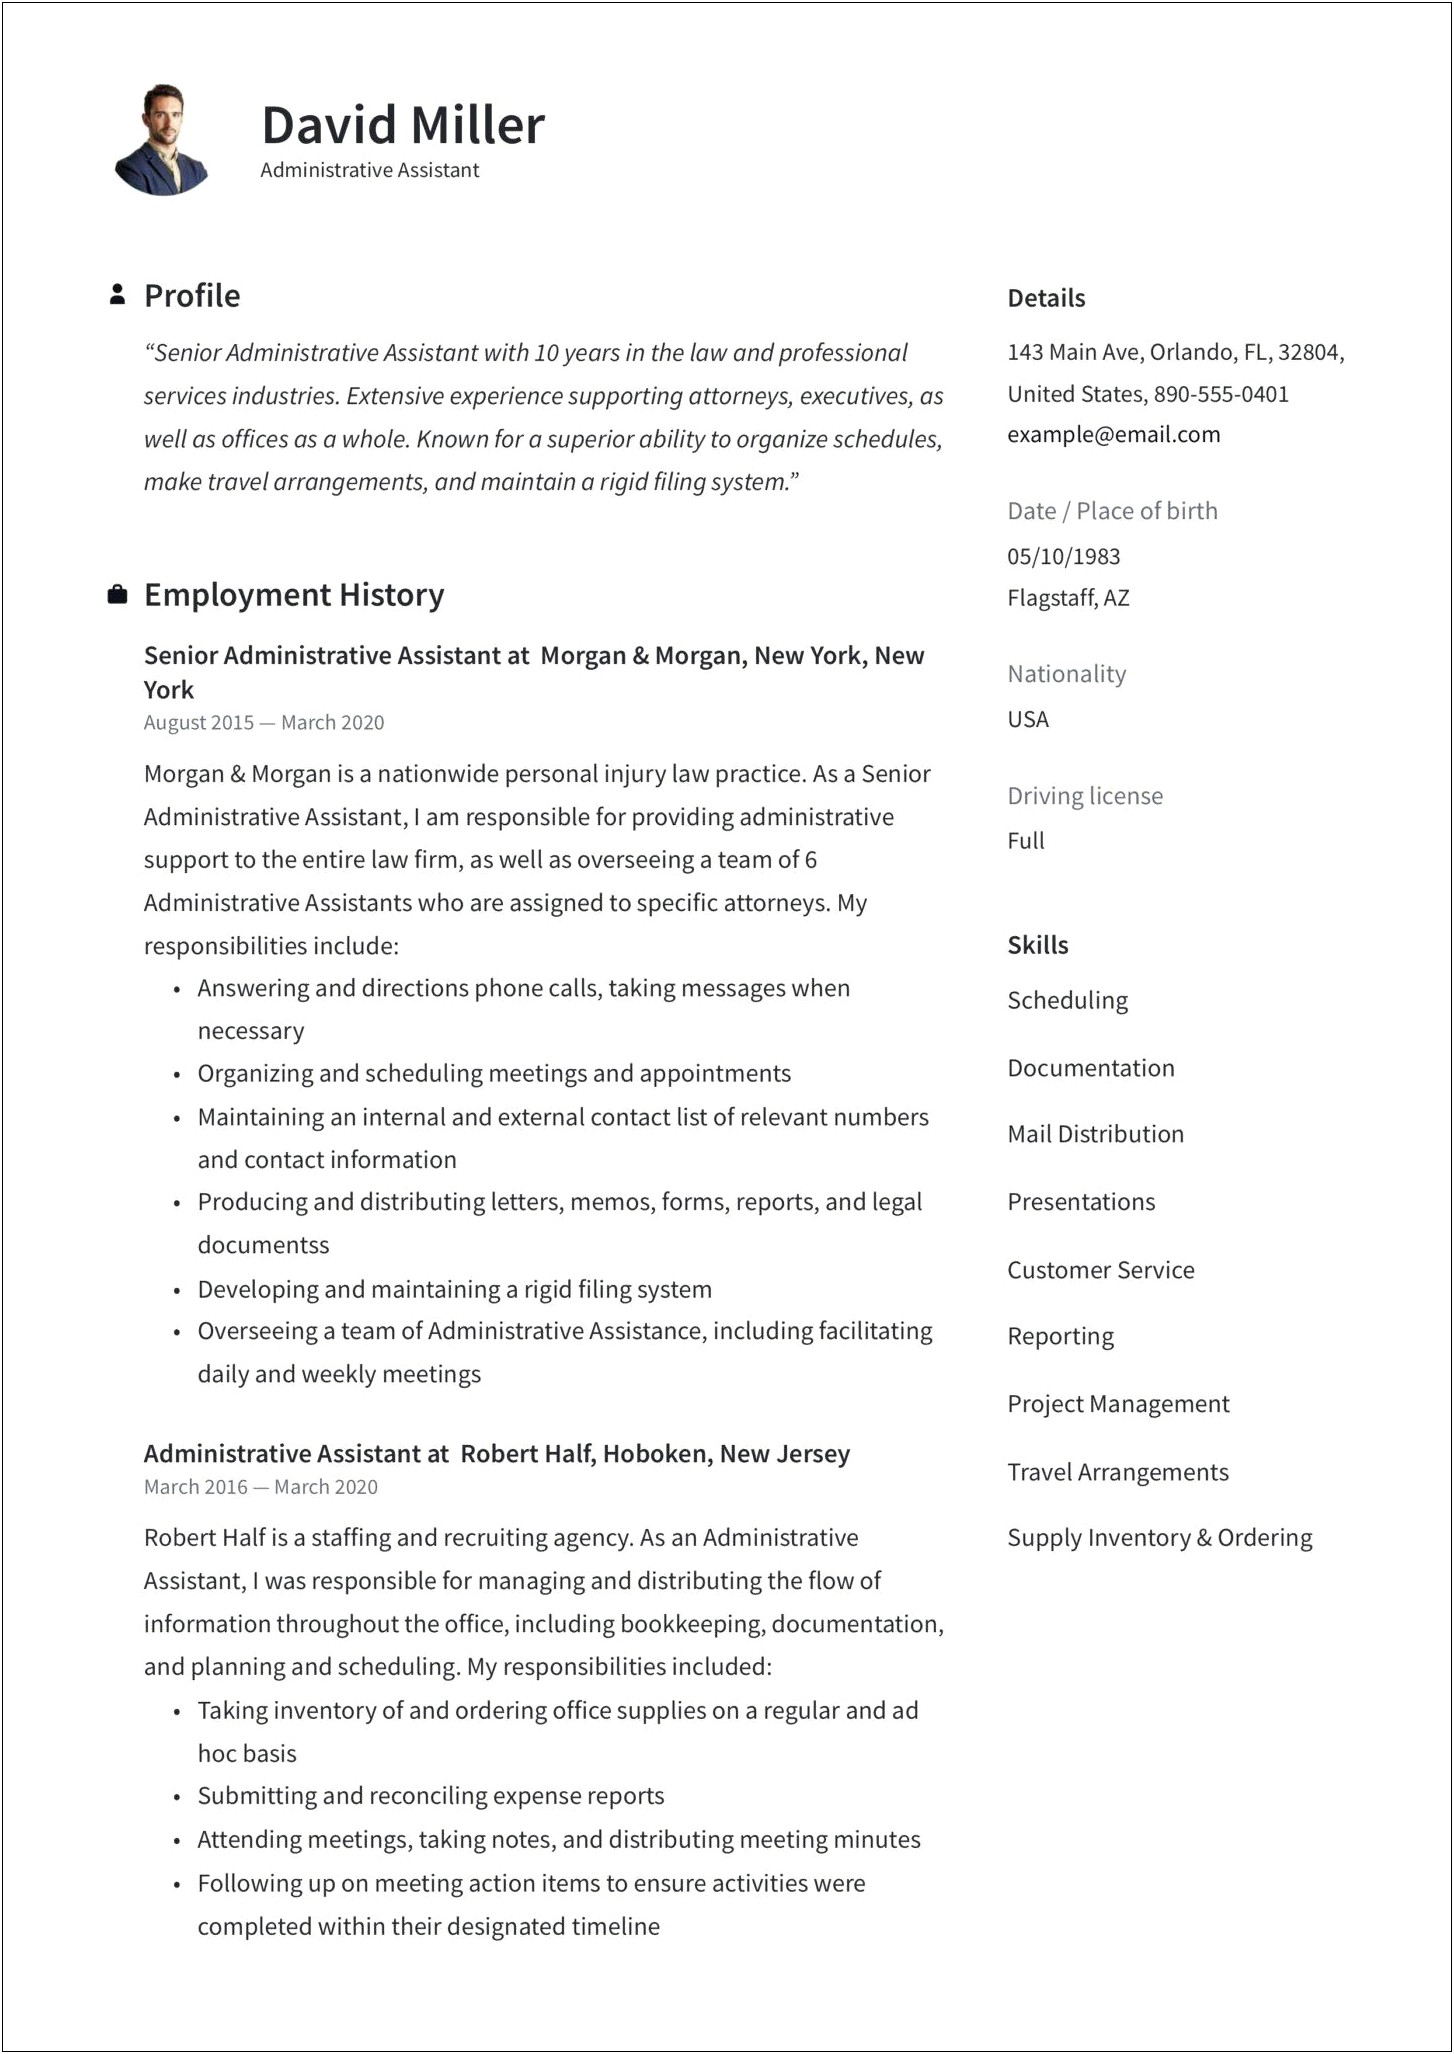 Resume Profile Examples For Administrative Assistant